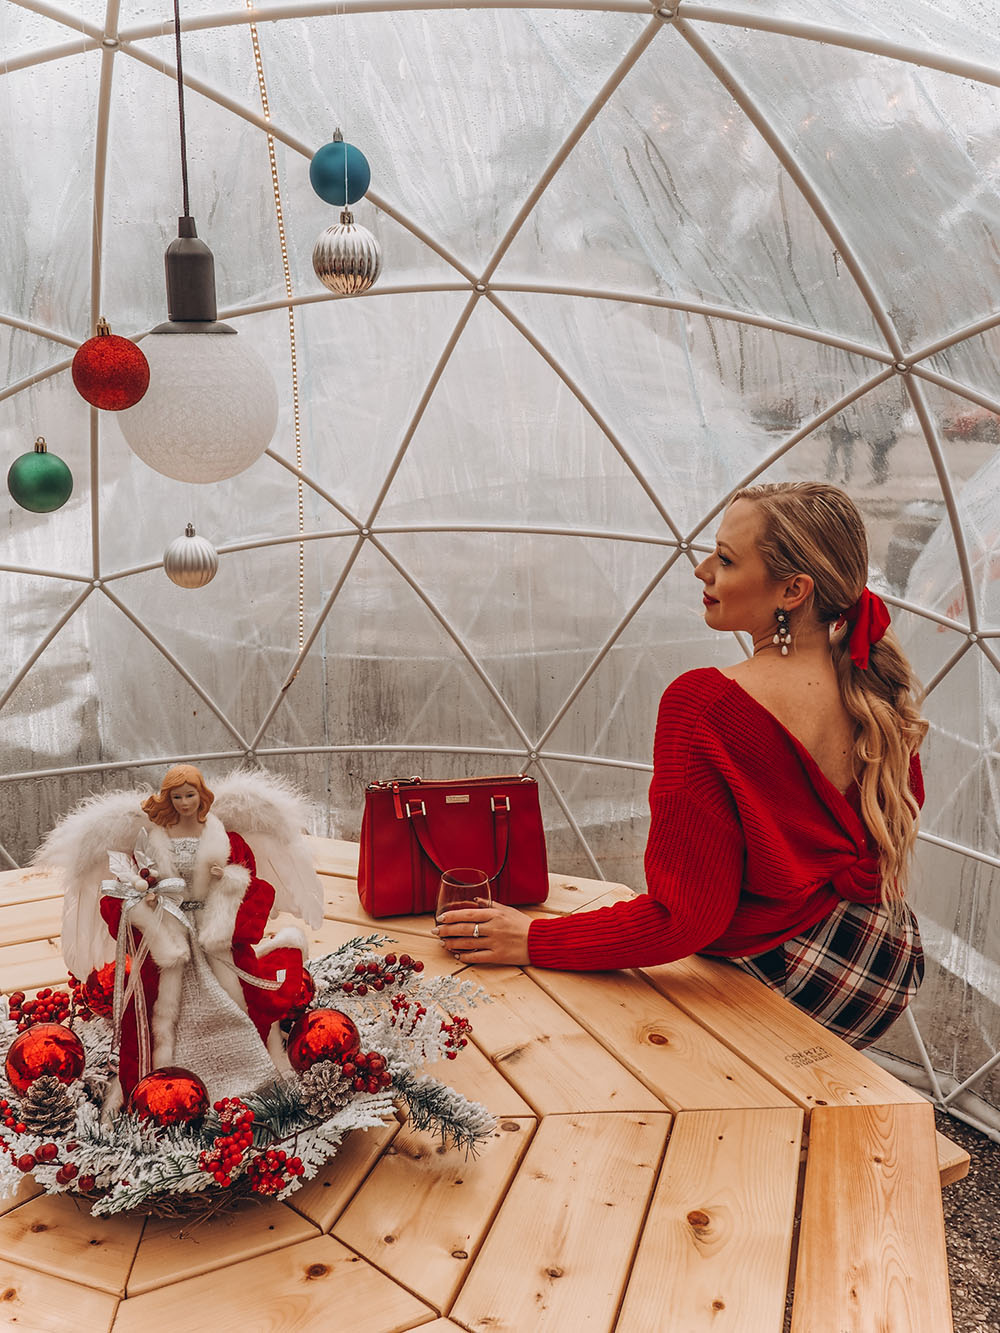 Looking for some fun things to do at Christmas in Toronto this holiday season? This guide is for you! Toronto has so many incredibly fun & festive activities to do during the Christmas season. From festive pop up bars to family friendly fun, this guide has you covered to get the most out of the Christmas season in Toronto! Pictured here: Dine in an igloo in St. Jacobs!